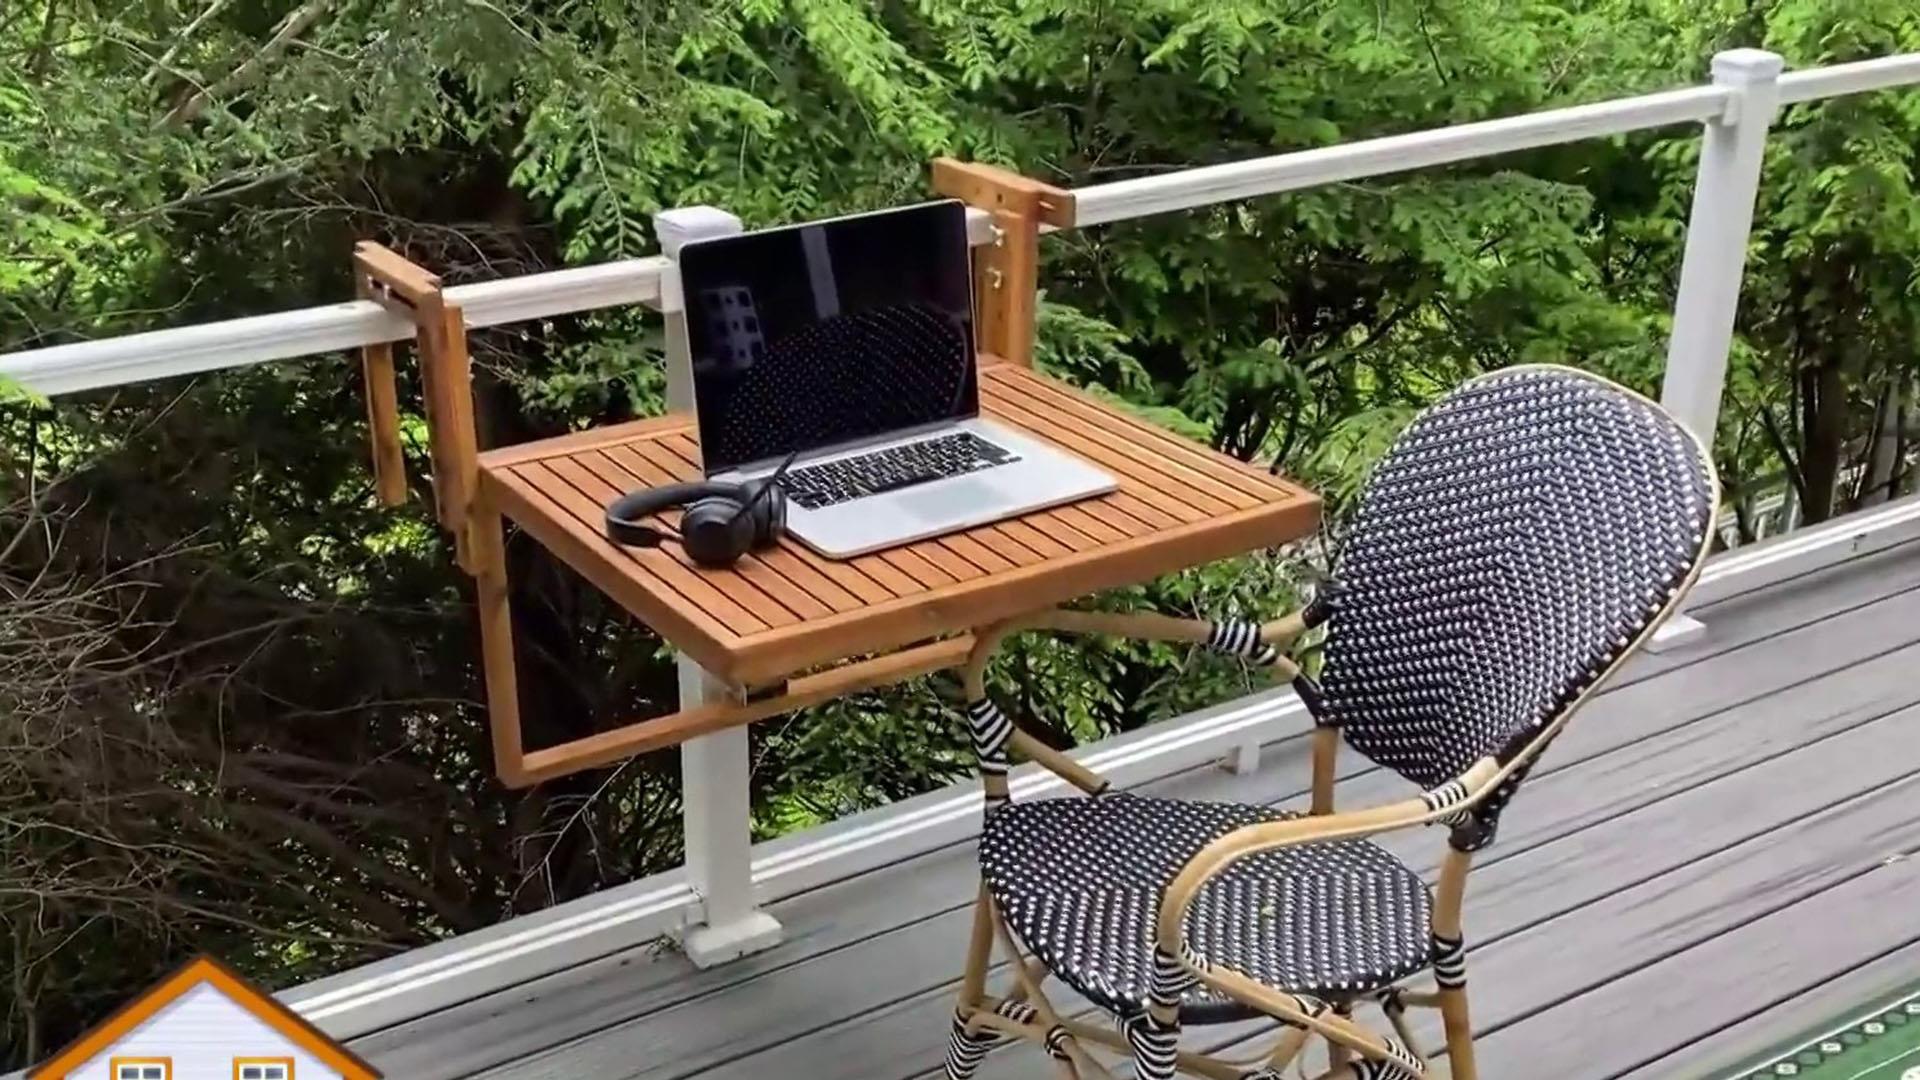 How to move your home office outside